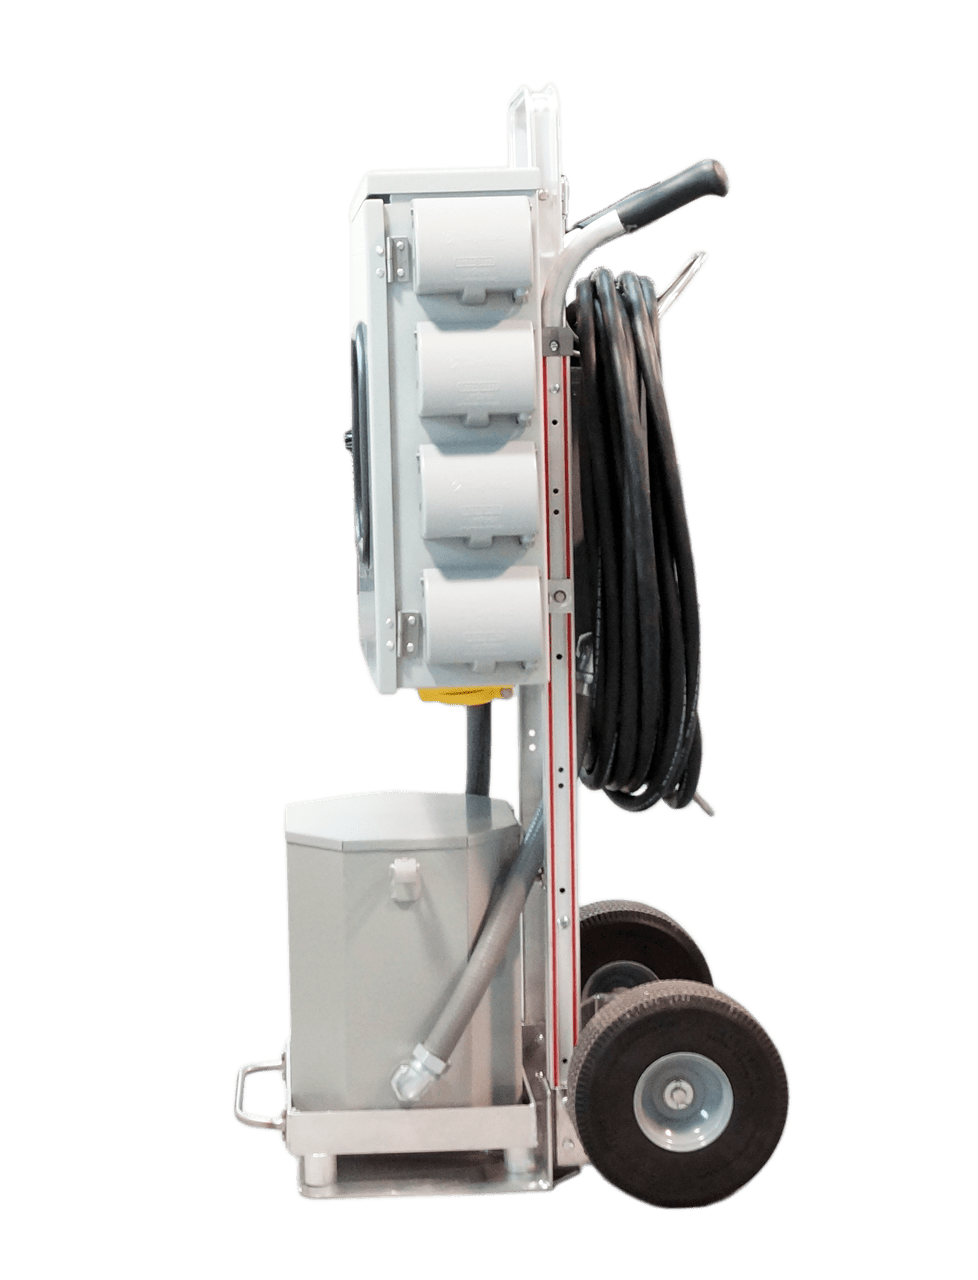 products-powercart4__58076.1410372296.1280.1280.png